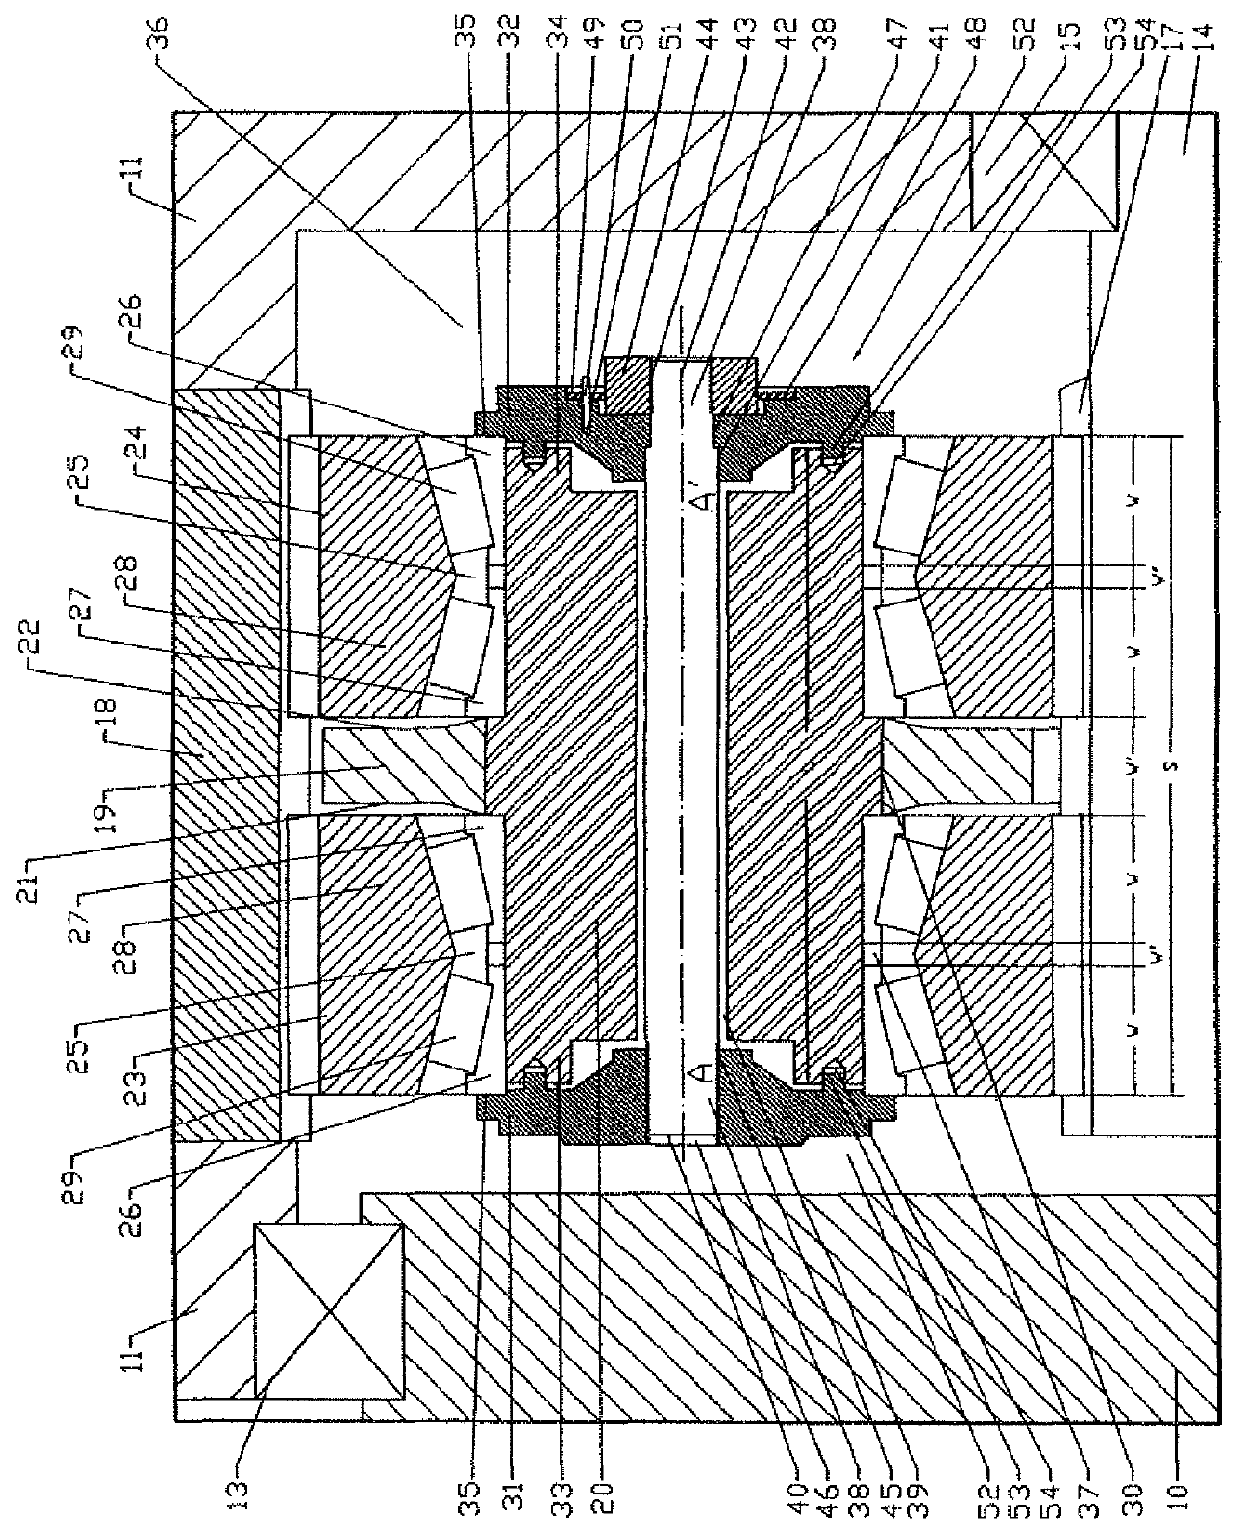 Planetary type gear unit comprising a planet carrier with a planet bogie plate